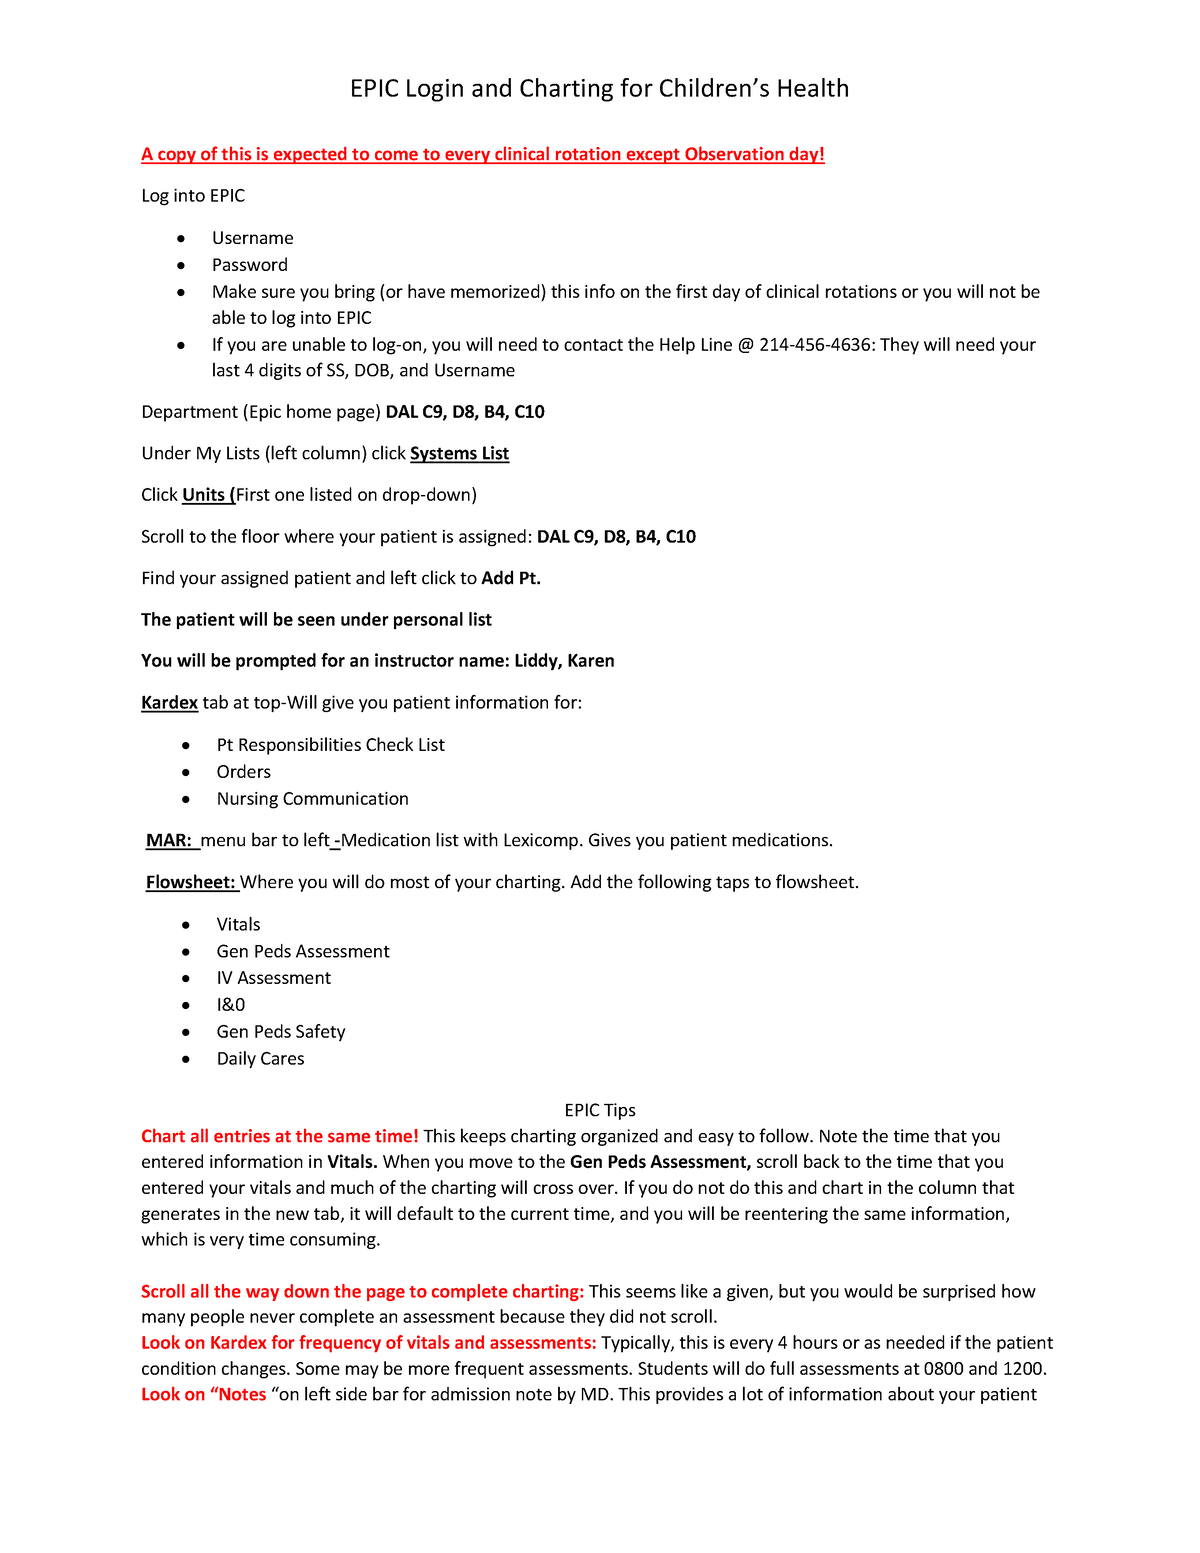 EPIC Charting Help Sheet Spring 2022 EPIC Login and Charting for